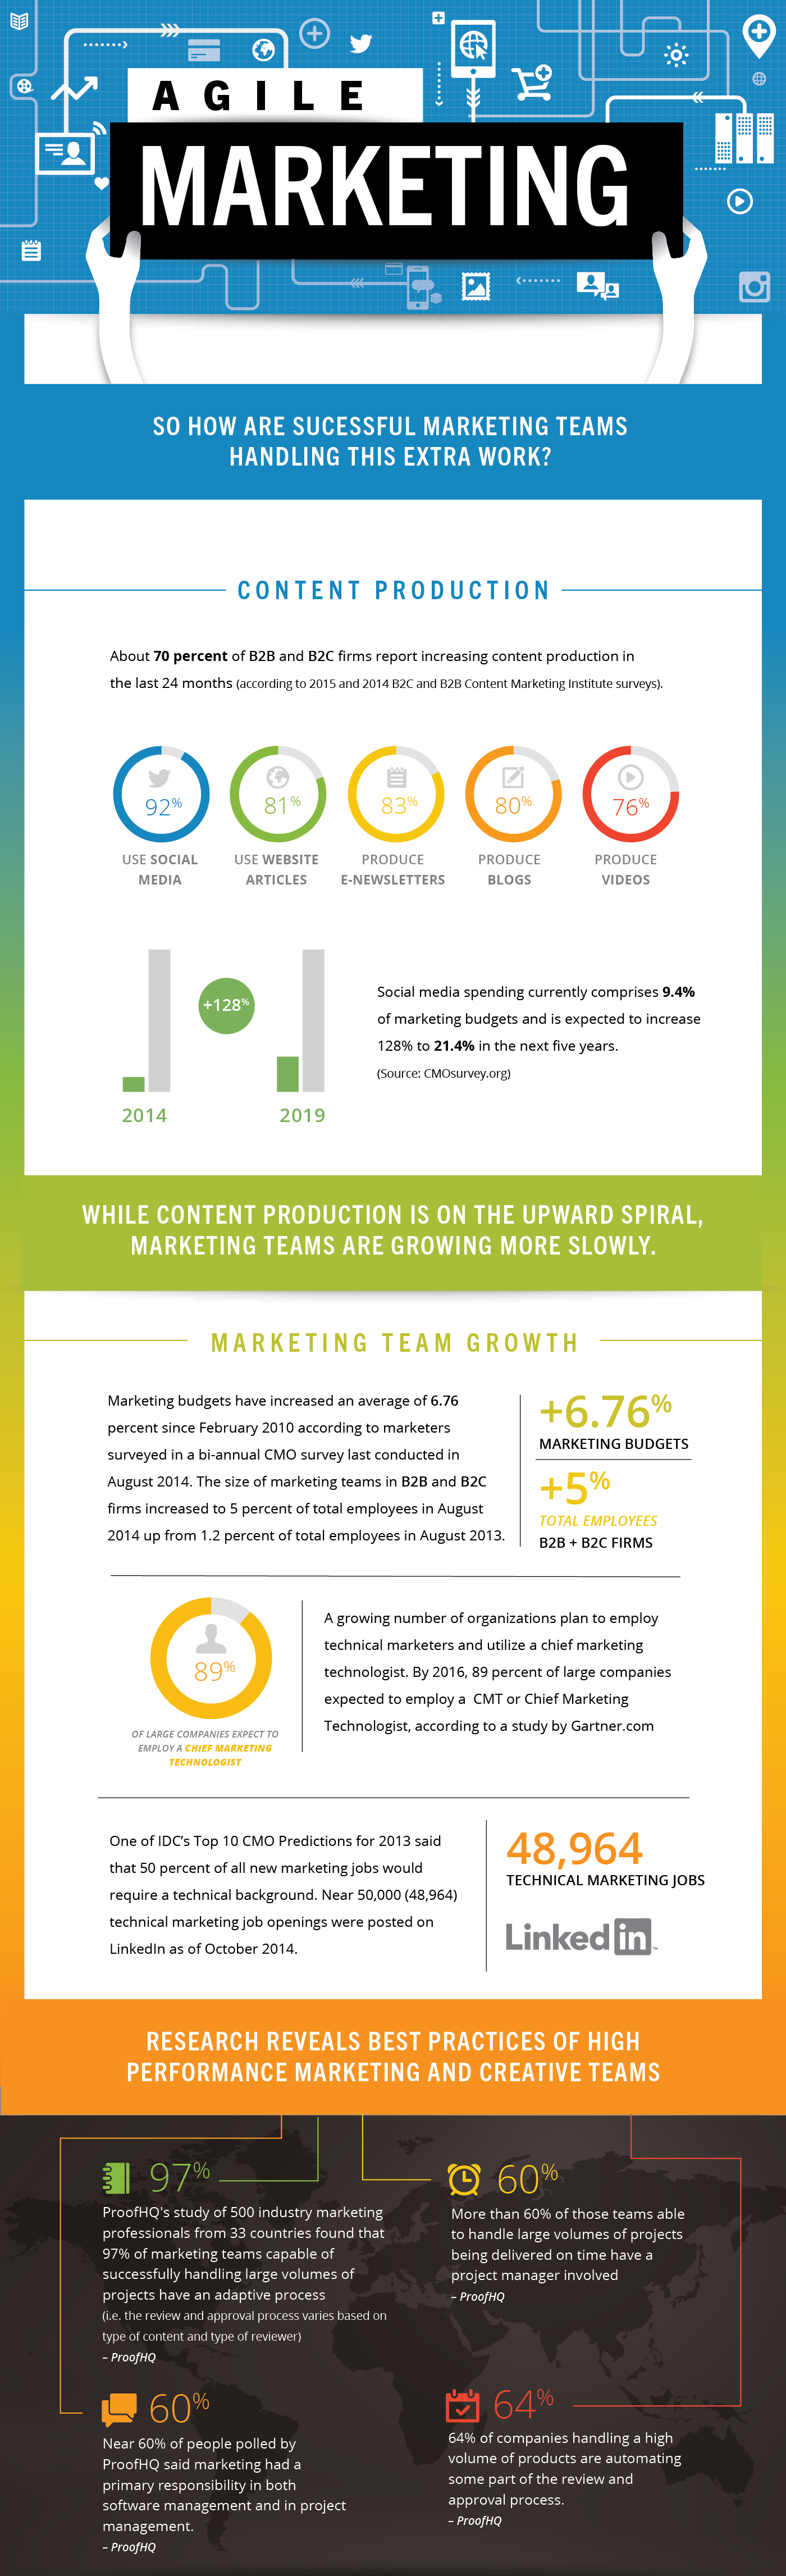 Is Your Agency Ready for Agile Marketing? [Infographic]